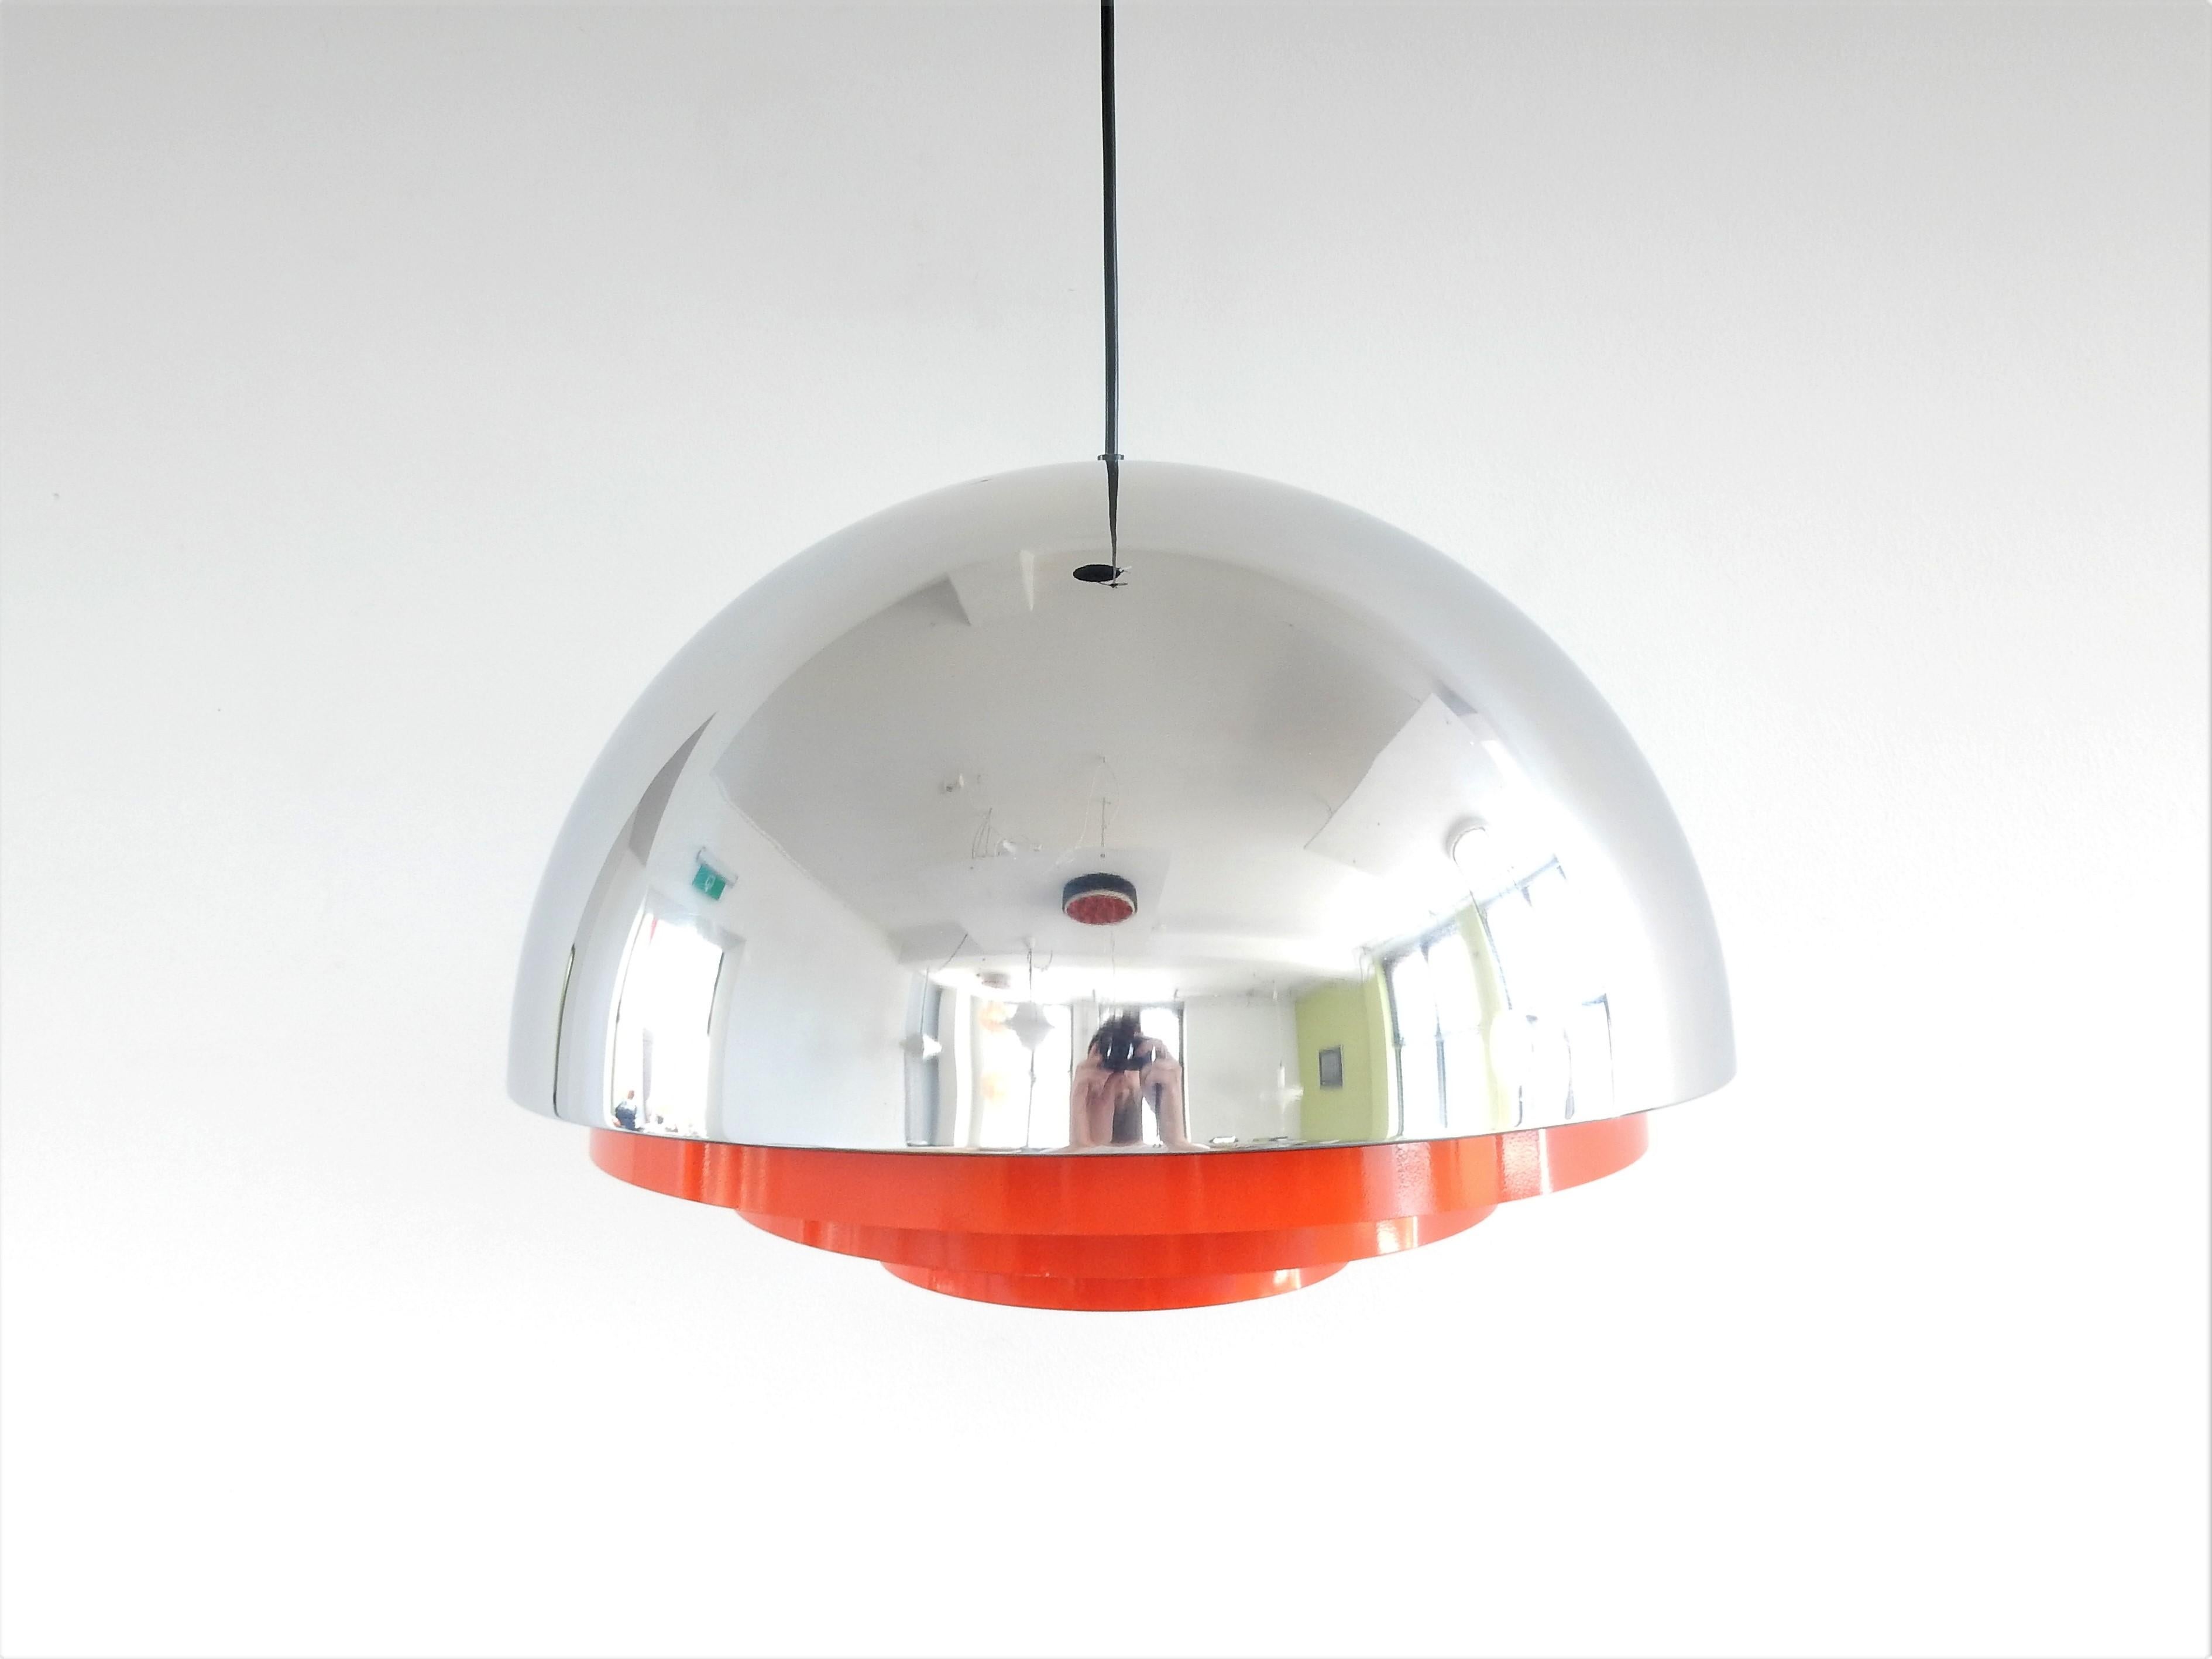 This 'Milieu Maxi' pendant lamp is a special edition from the Chrome Line series. The lamp is shaped like a half bowl, chrome plated, and it has orange metal rings and a cream inside to diffuse a soft and warm light. This lamp is in a very good and